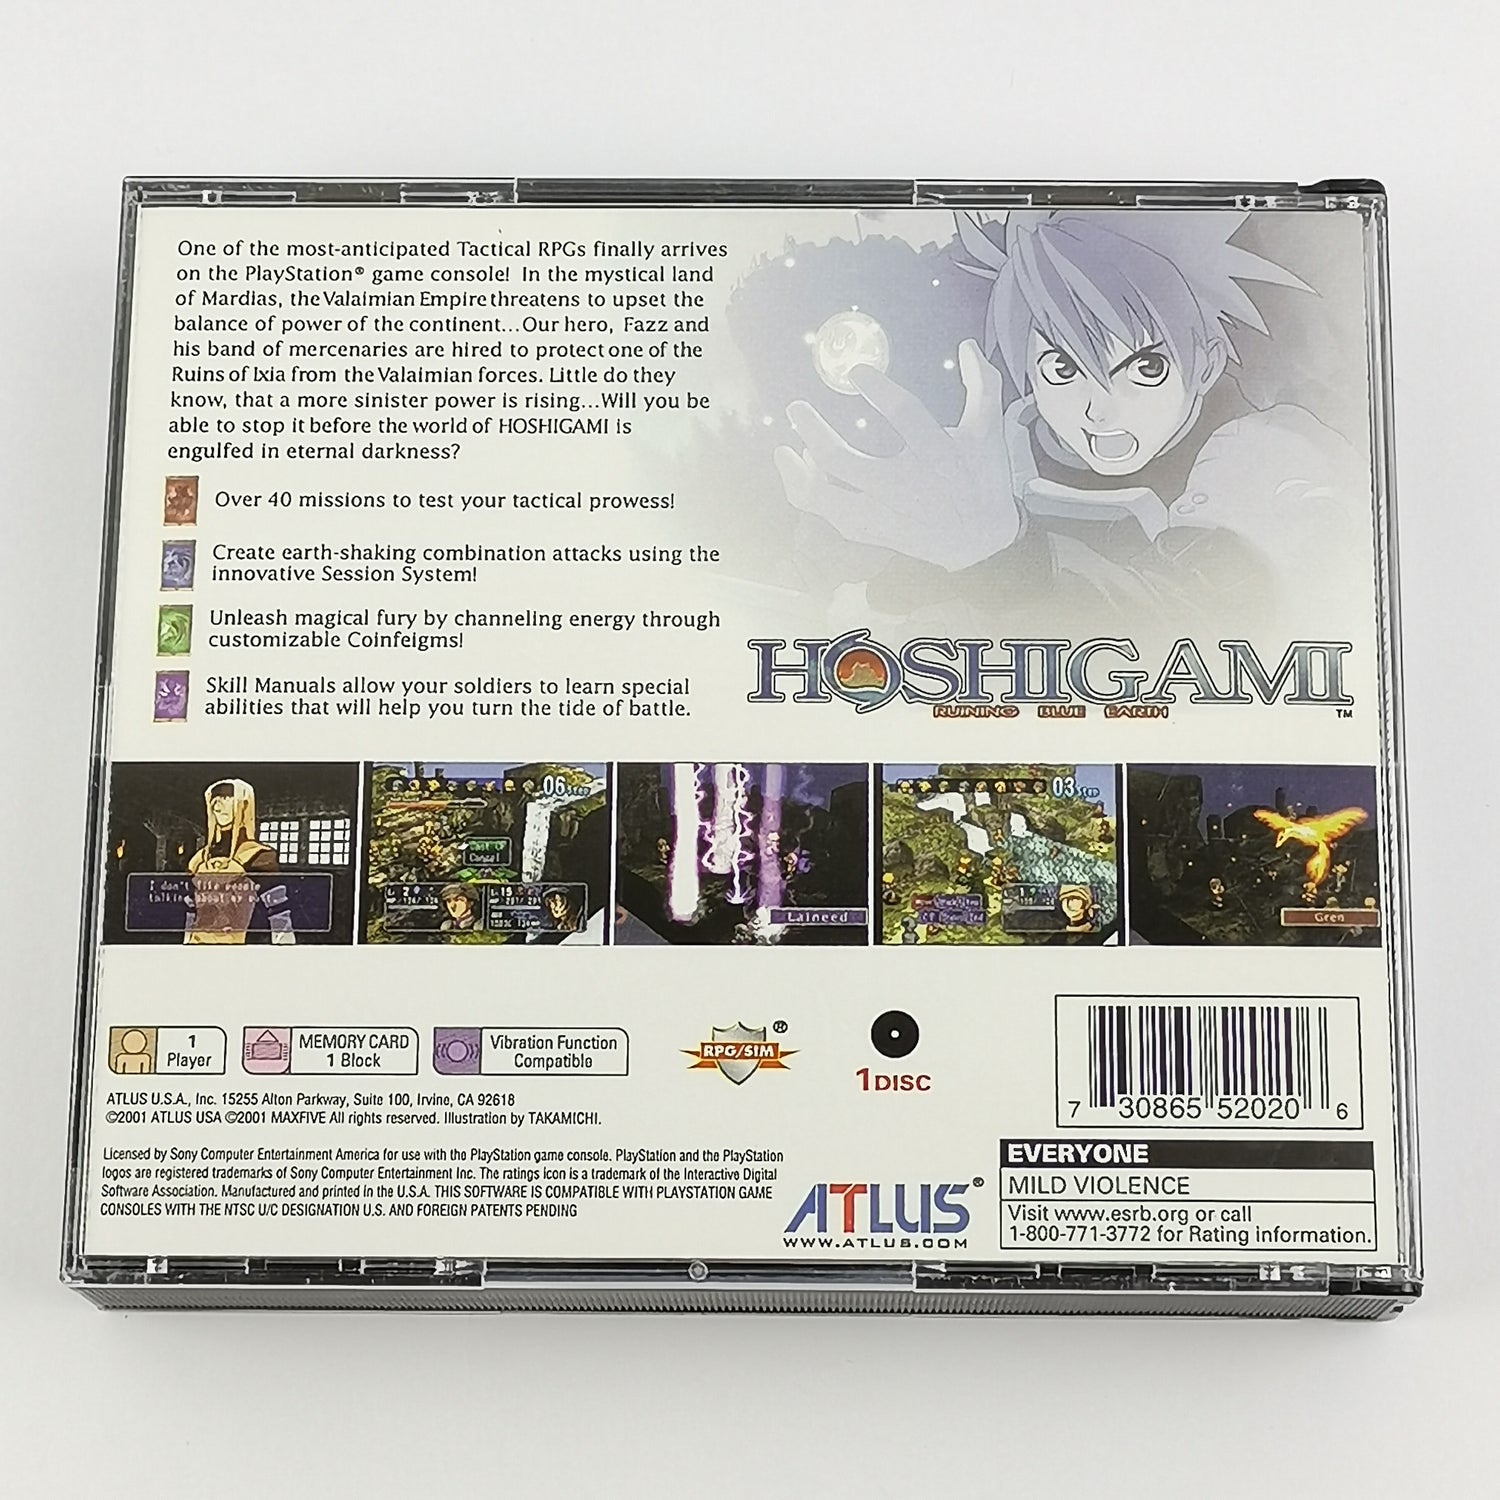 Sony Playstation 1 Game: Hoshigami Ruining Blue Earth - OVP Instructions USA PS1